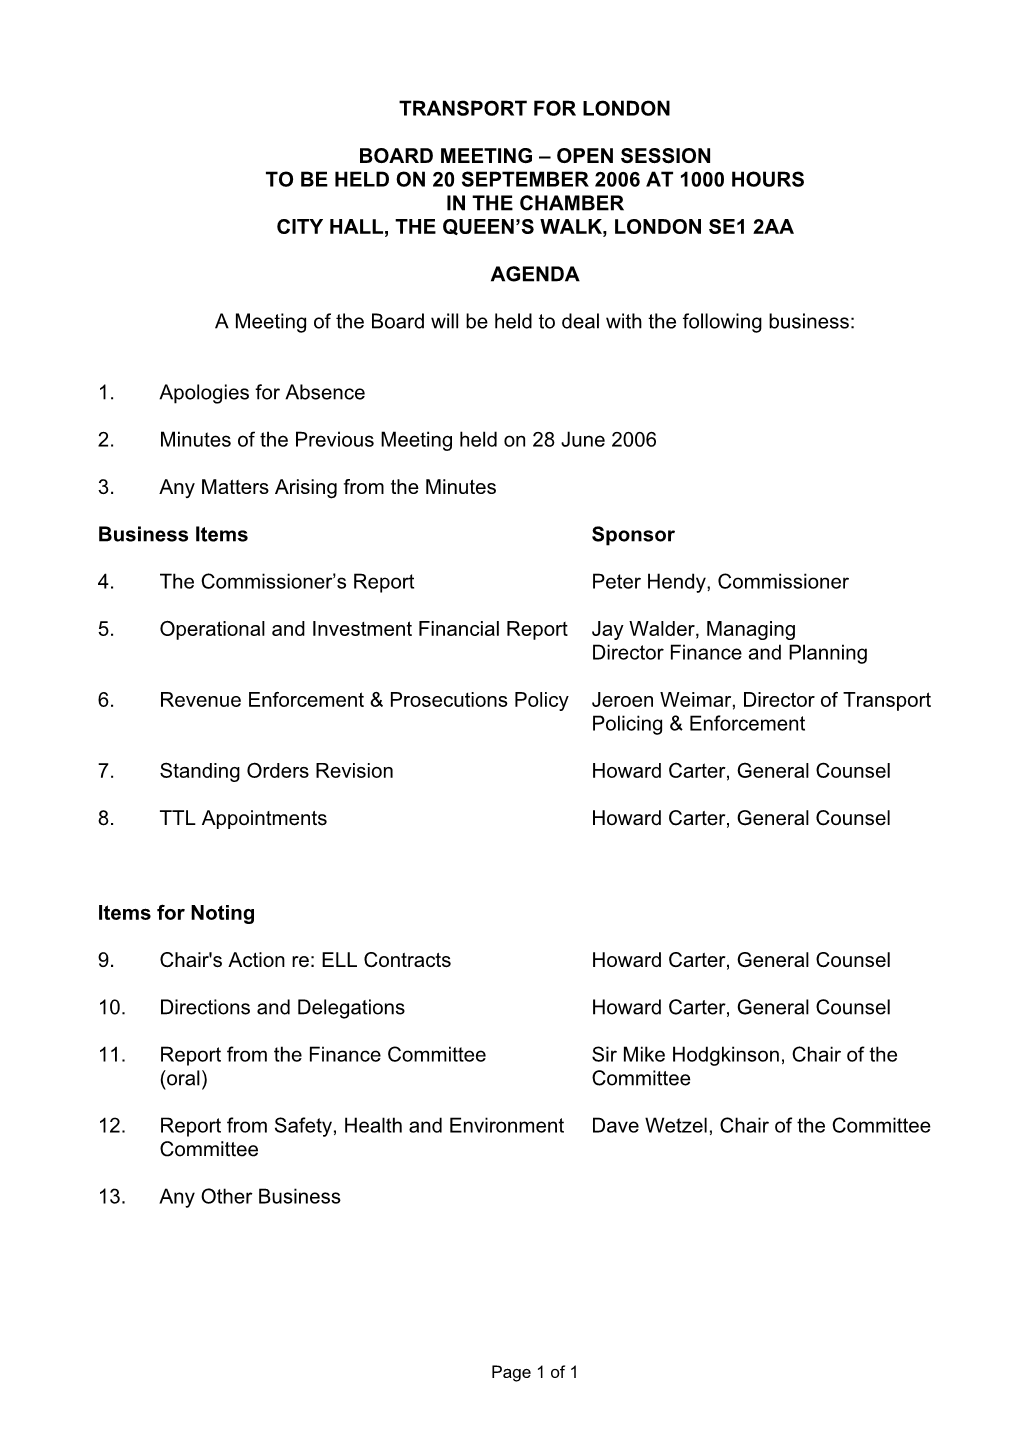 Board Meeting – Open Session to Be Held on 20 September 2006 at 1000 Hours in the Chamber City Hall, the Queen’S Walk, London Se1 2Aa